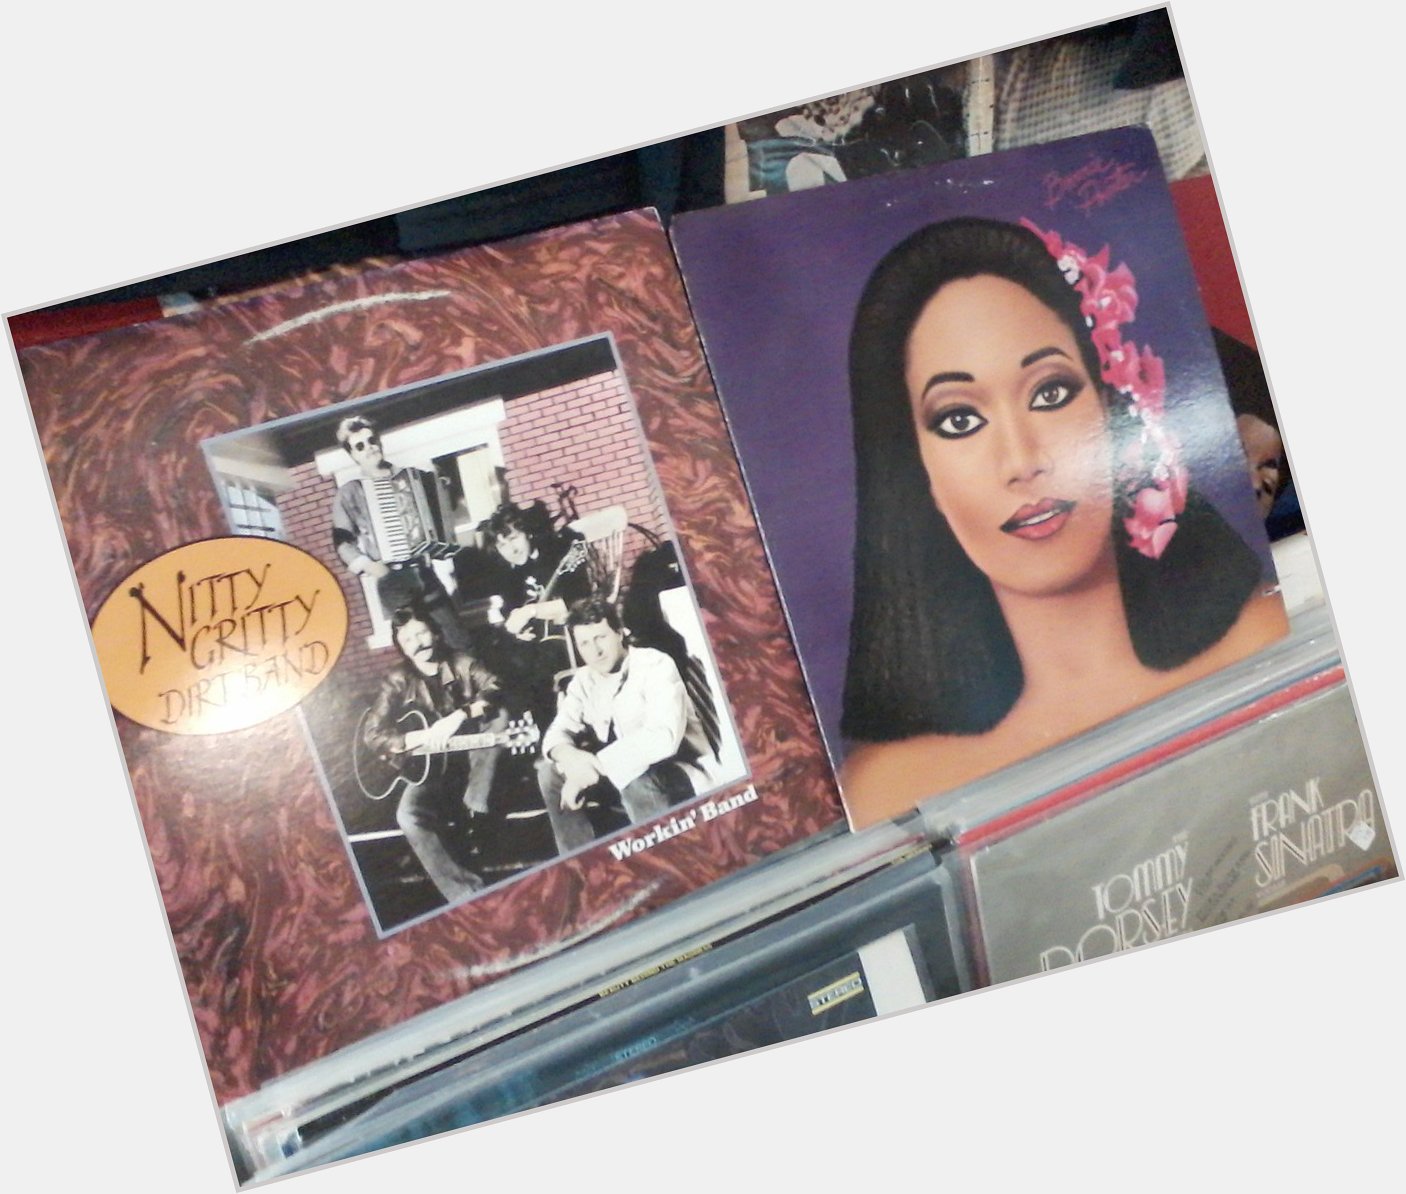 Happy Birthday to Jeff Hanna of Nitty Gritty Dirt Band & Bonnie Pointer (Pointer Sisters) 